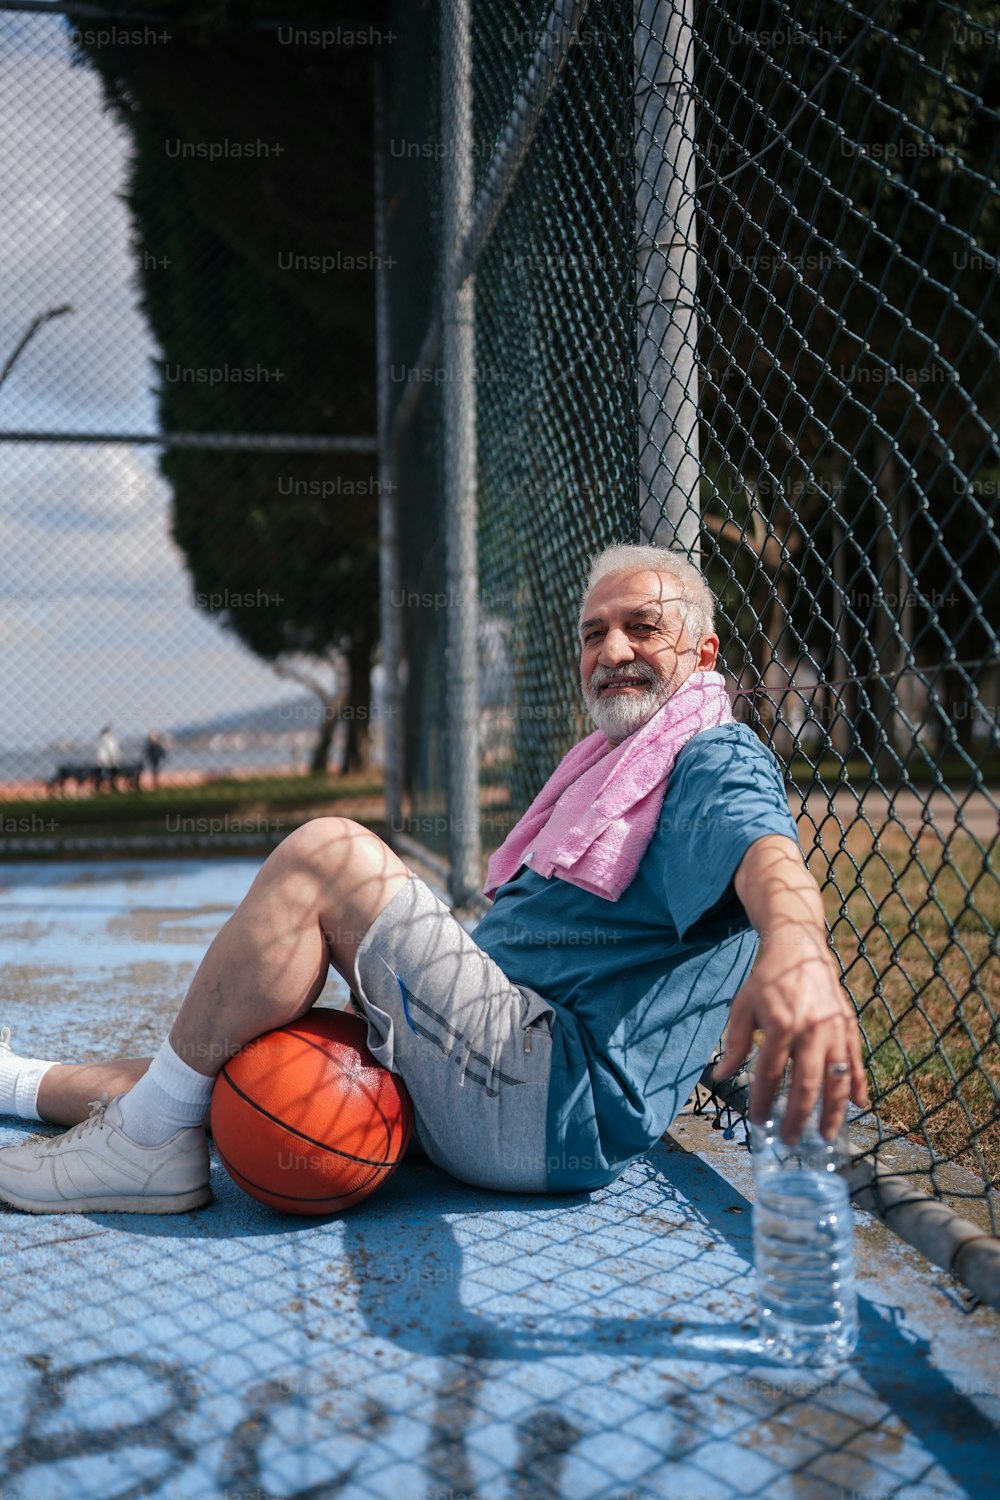 a man sitting on the ground with a basketball